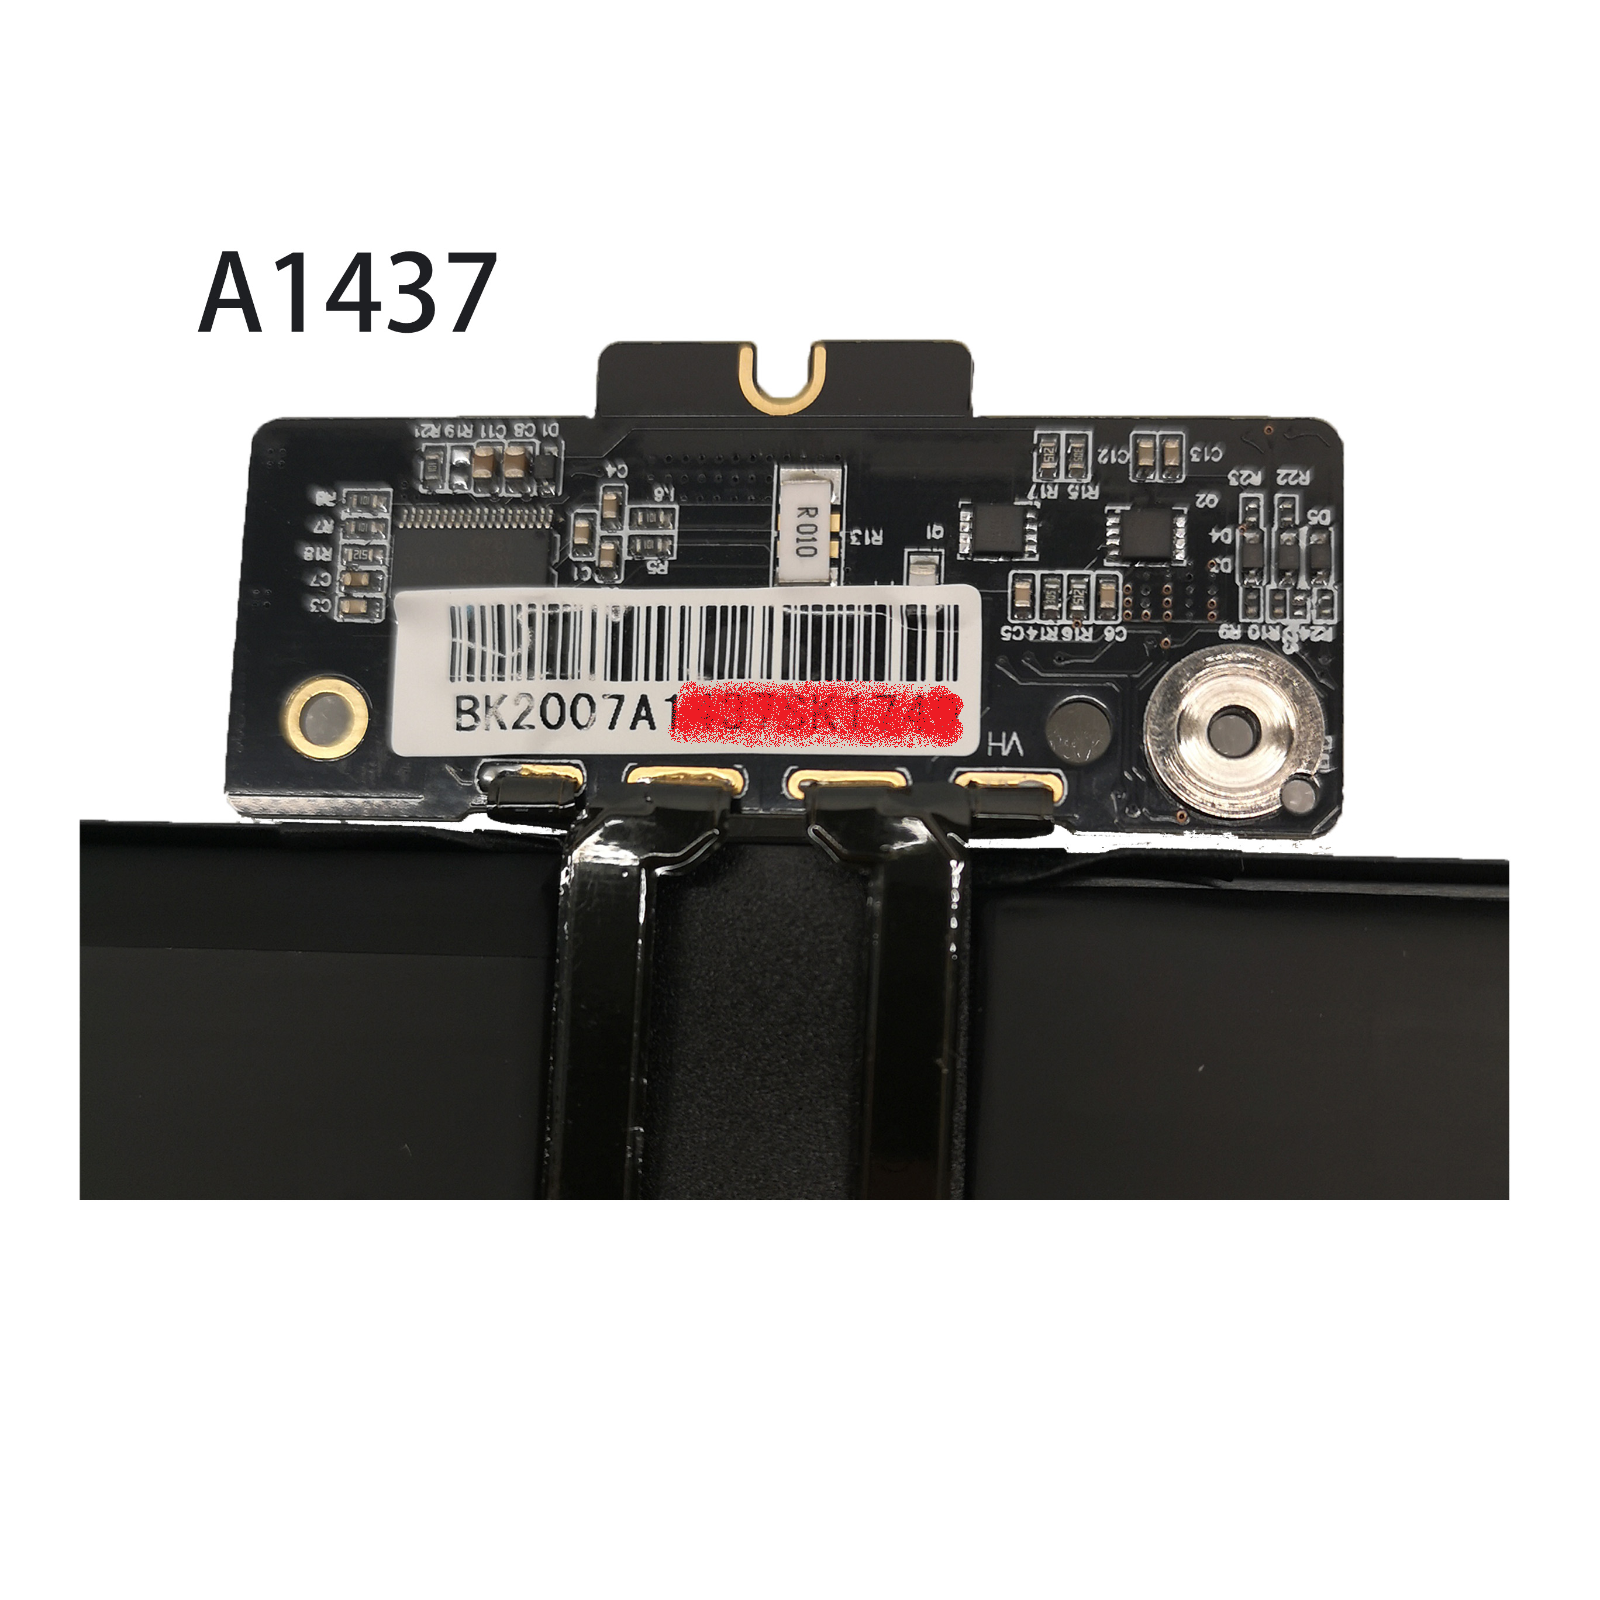 Accu voor Apple MacBook Pro 13 A1425 A1437 (Late 2012, Early 2013)(compatible)